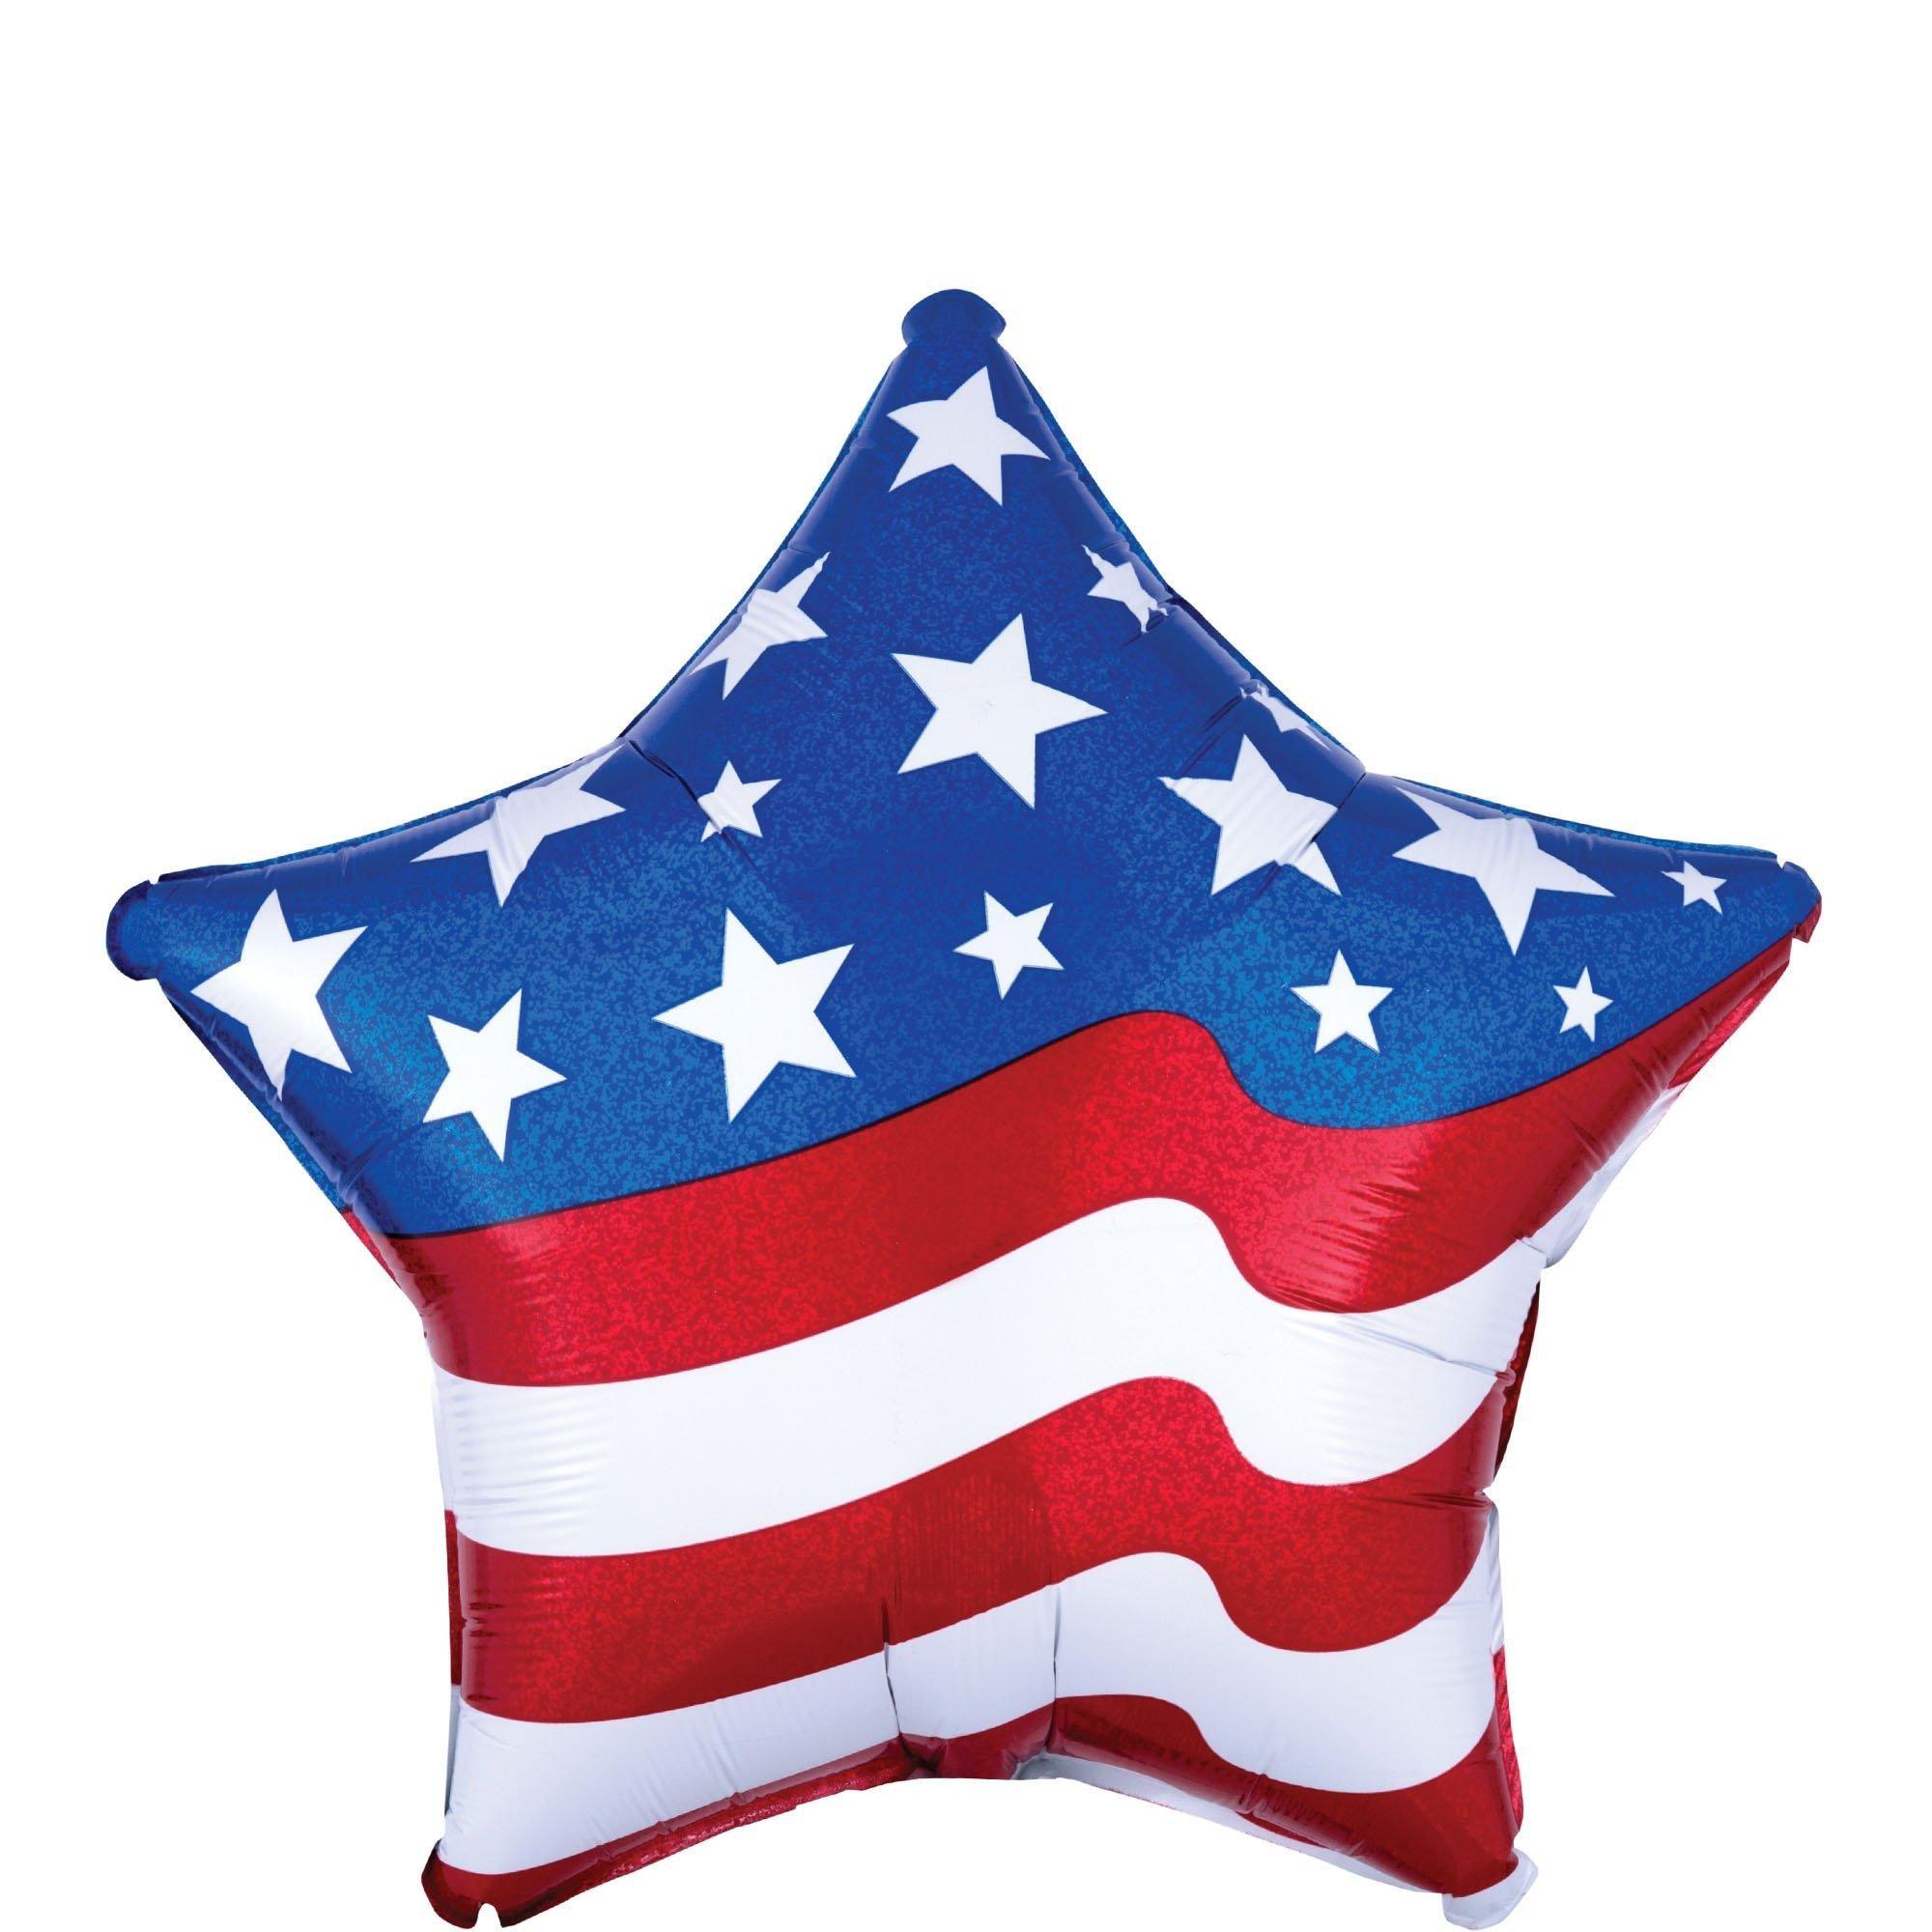 Premium American Flag Foil Balloon Bouquet with Balloon Weight, 13pc